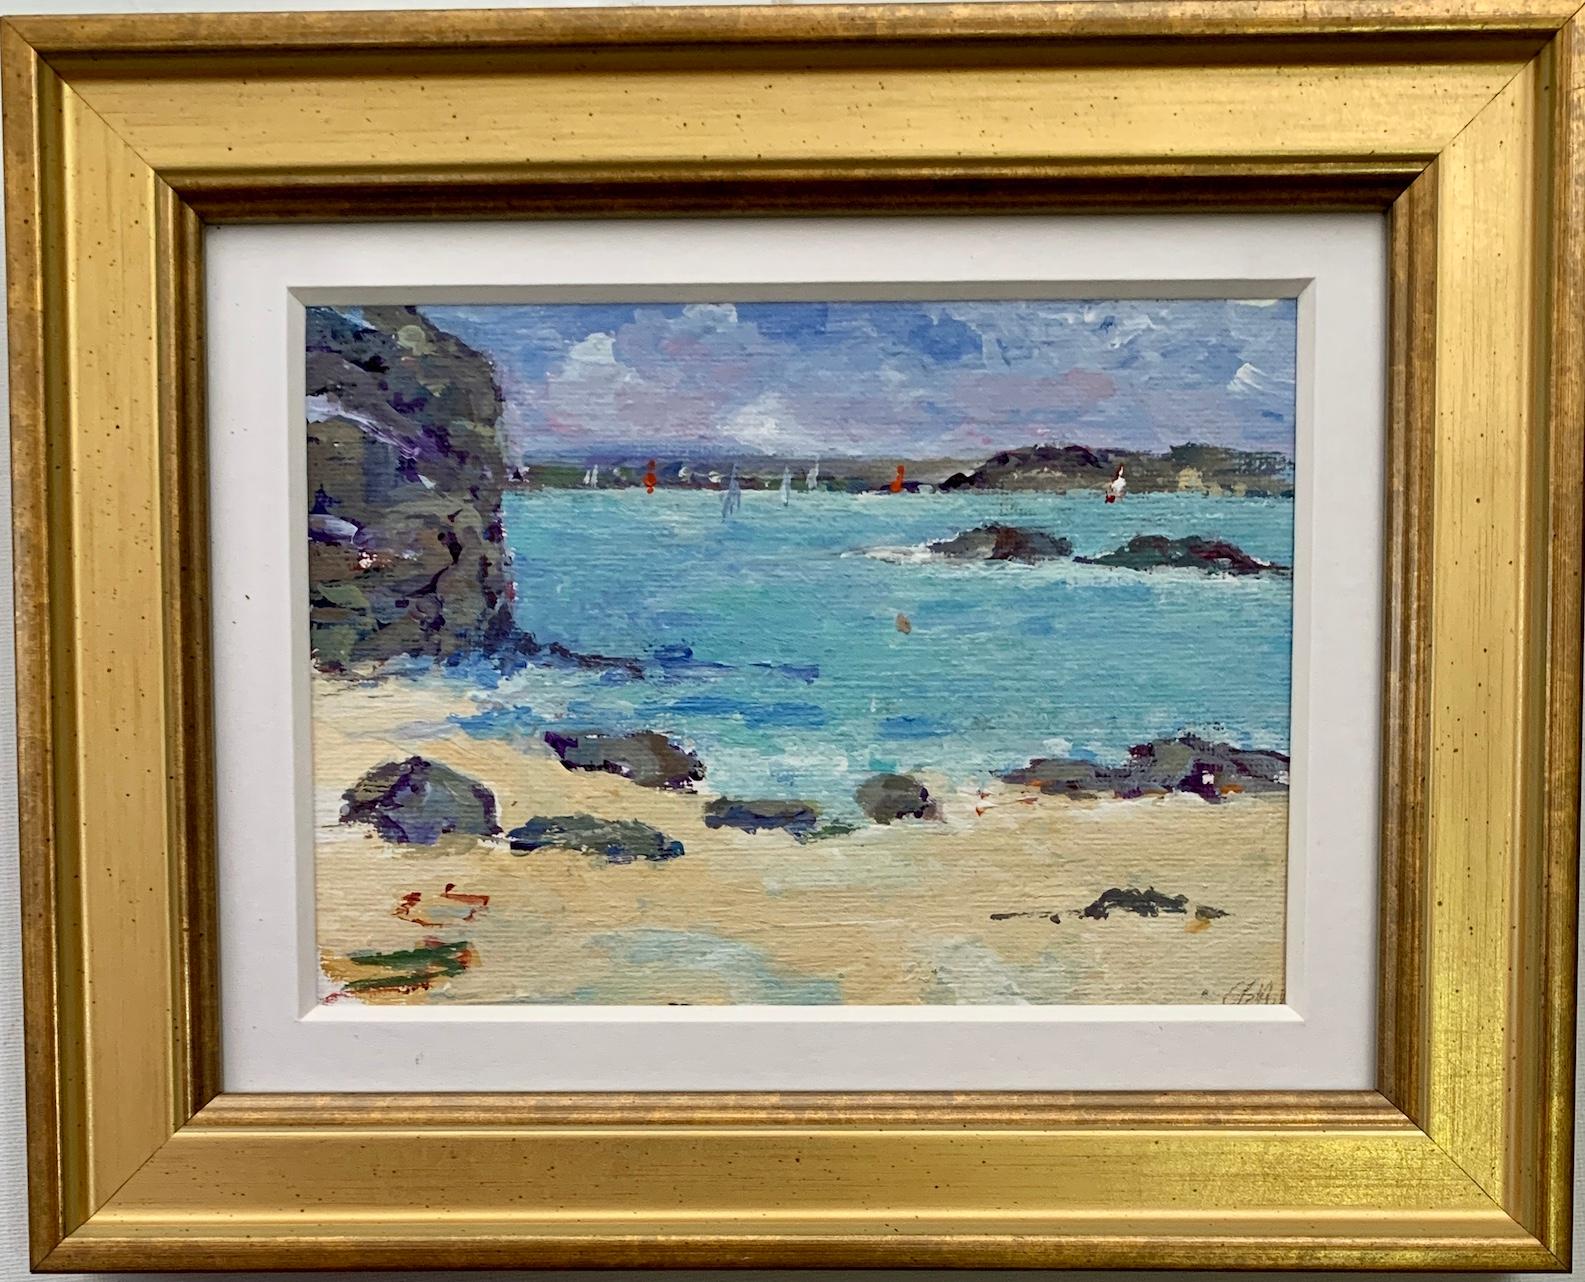 Charles Bertie Hall Figurative Painting - American Impressionist sketch of the West Coast of Scotland during the summer